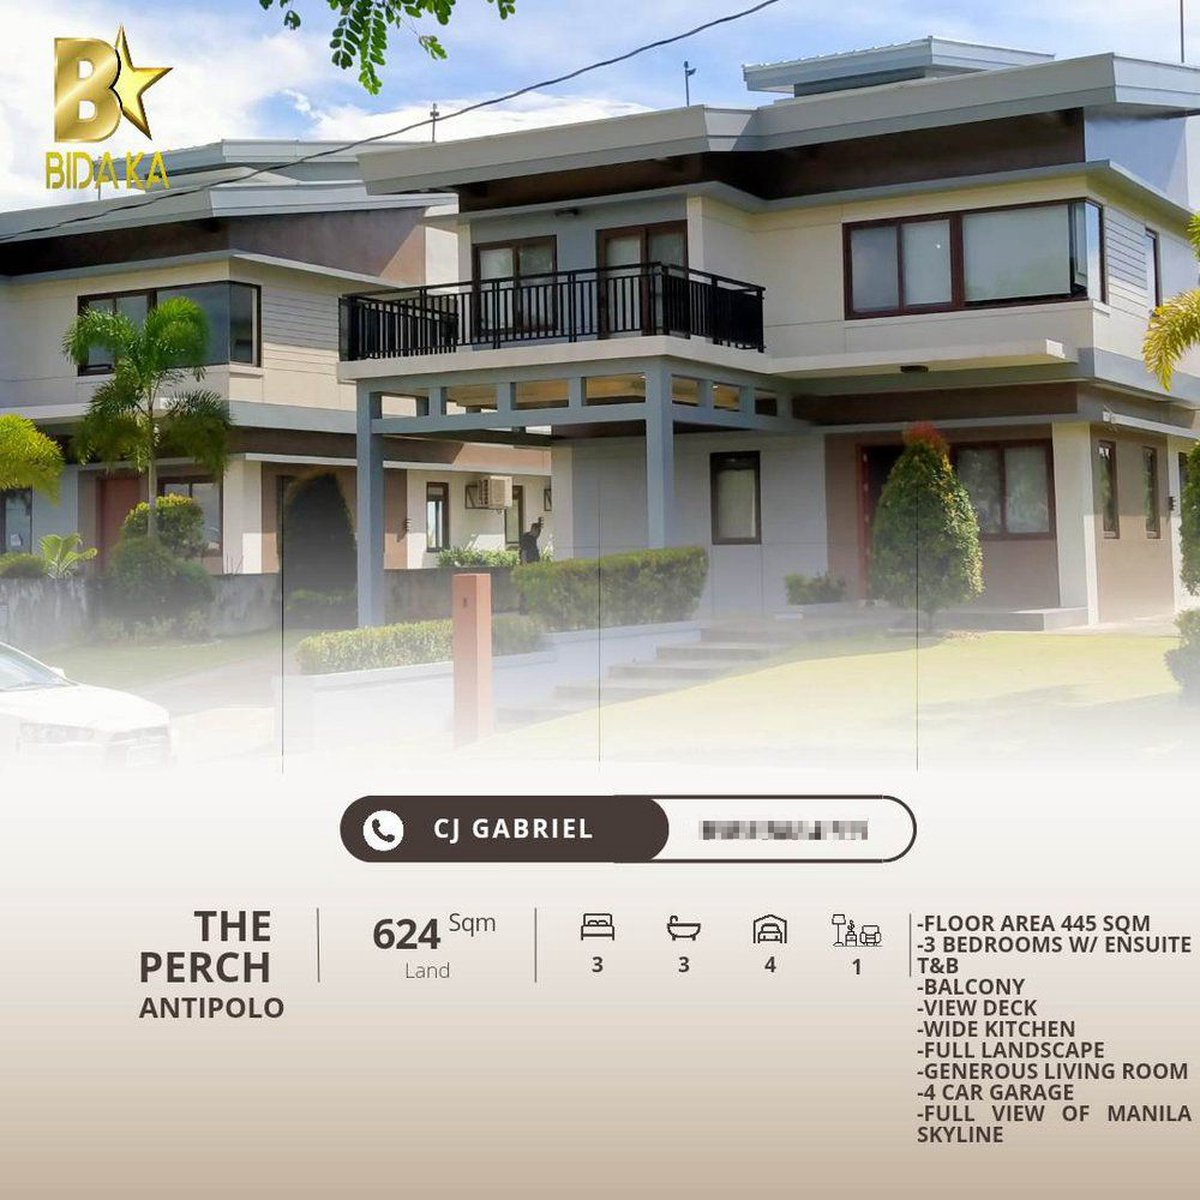 3-bedroom House For Sale in Antipolo Rizal